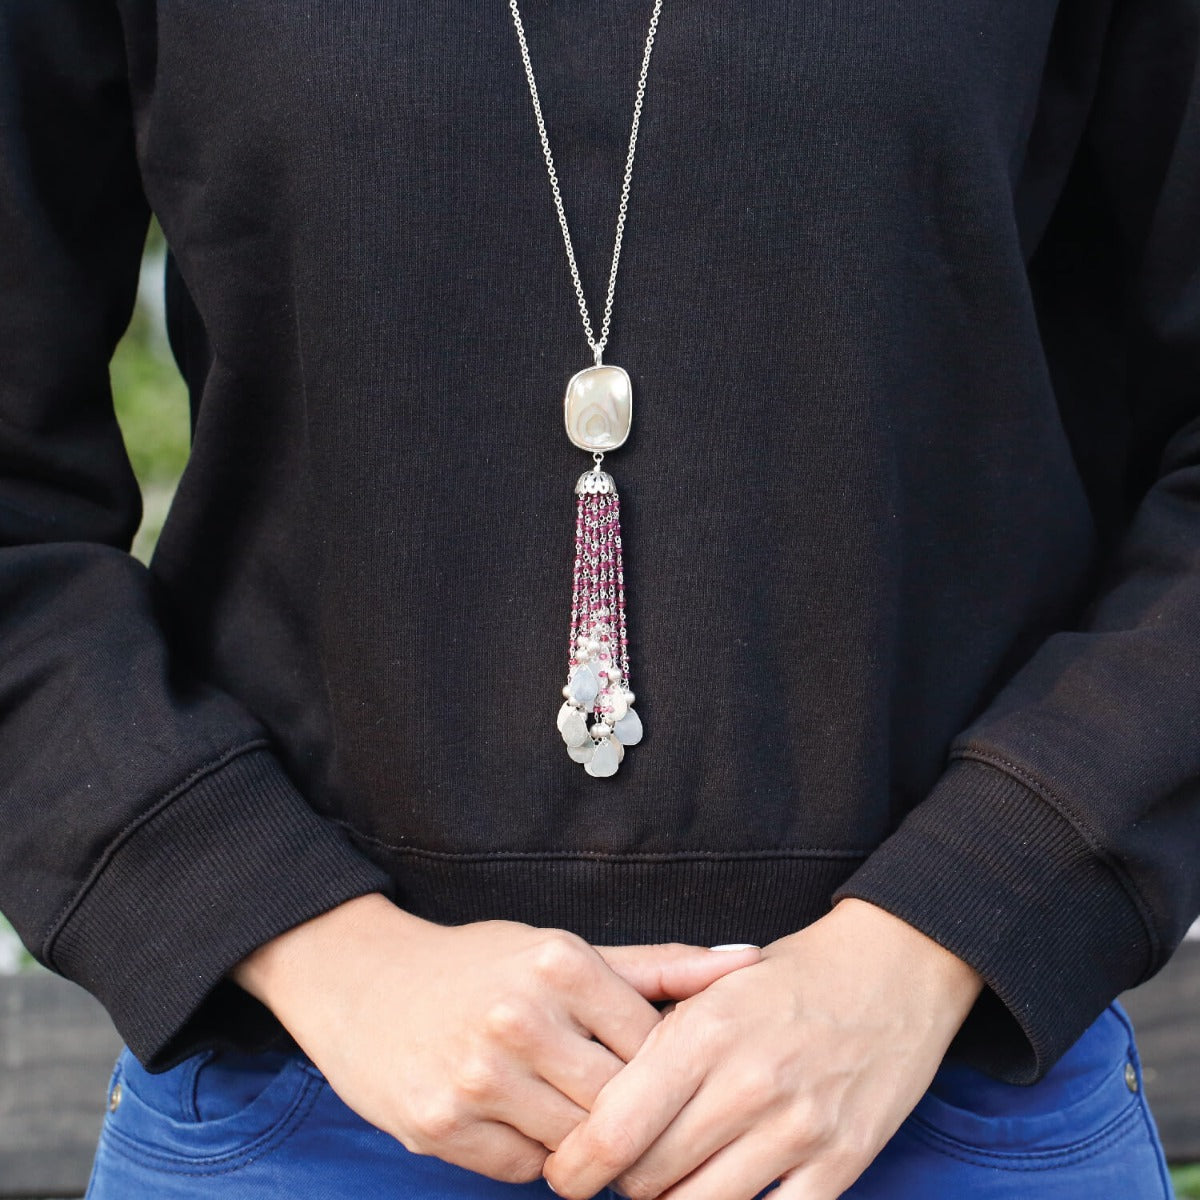 Abalone necklace with Garnet tassel